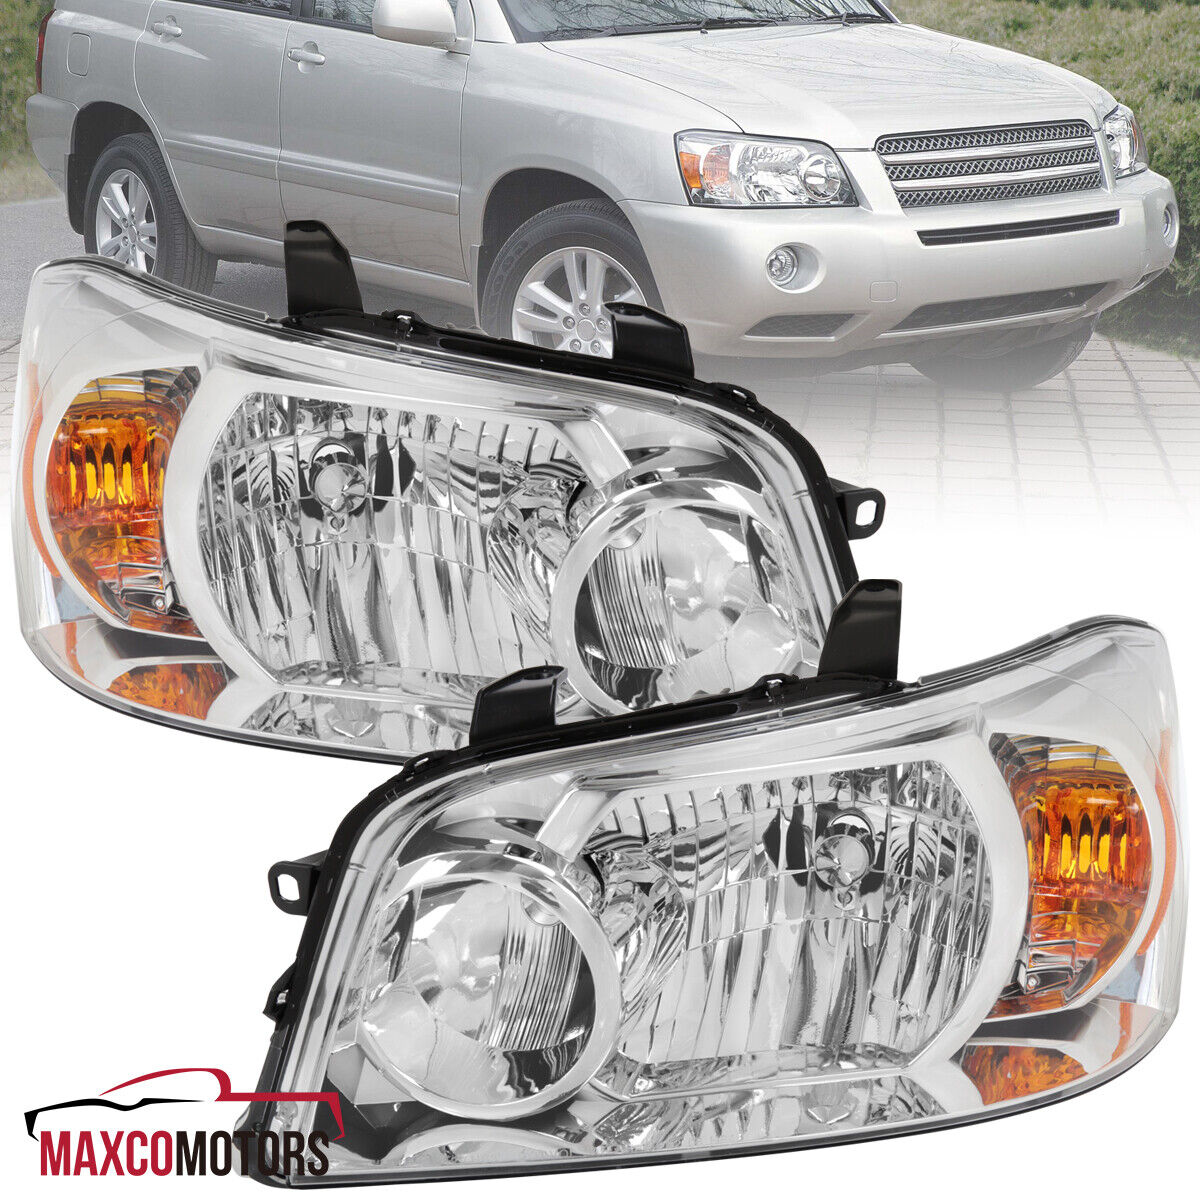 Clear Headlights Fits 2004-2007 Toyota Highlander Head Lamps Left+Right 04-07